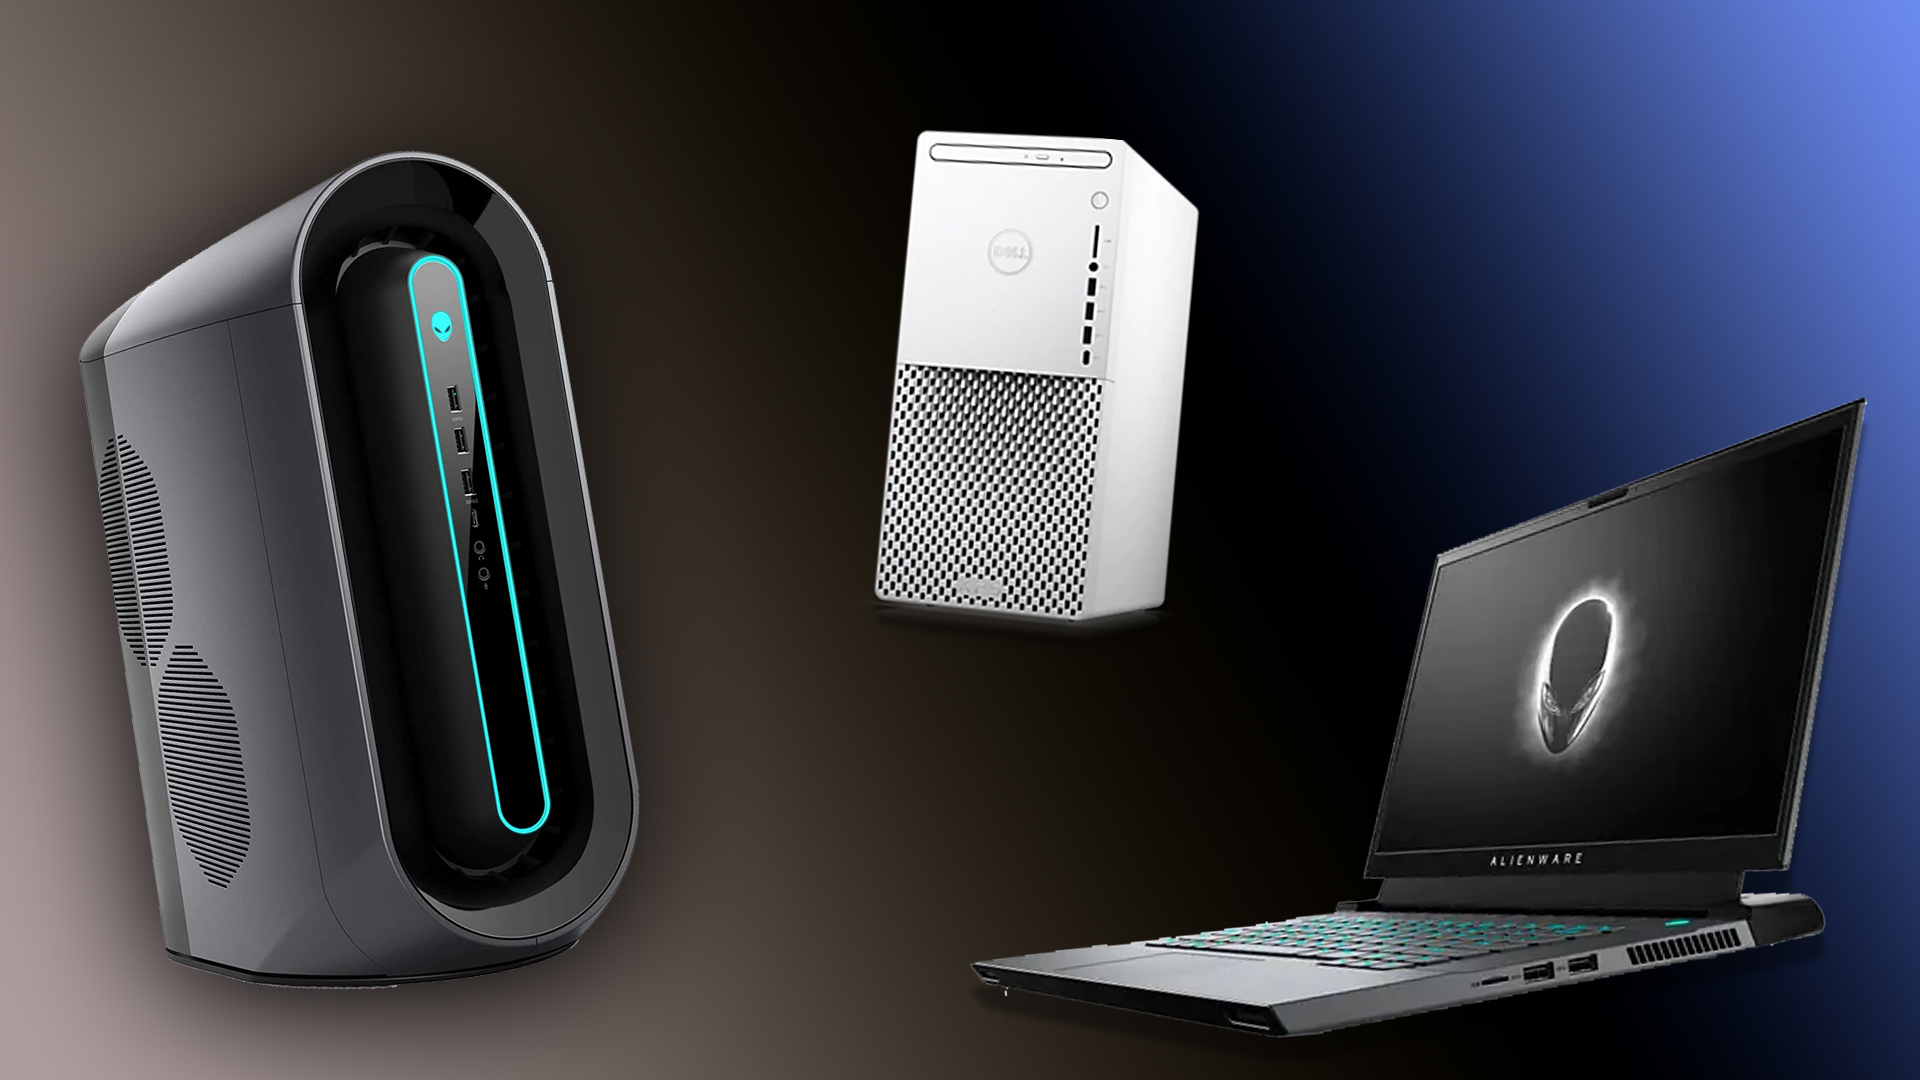 Get up to $650 off Alienware PCs and Laptops | Tom's Hardware